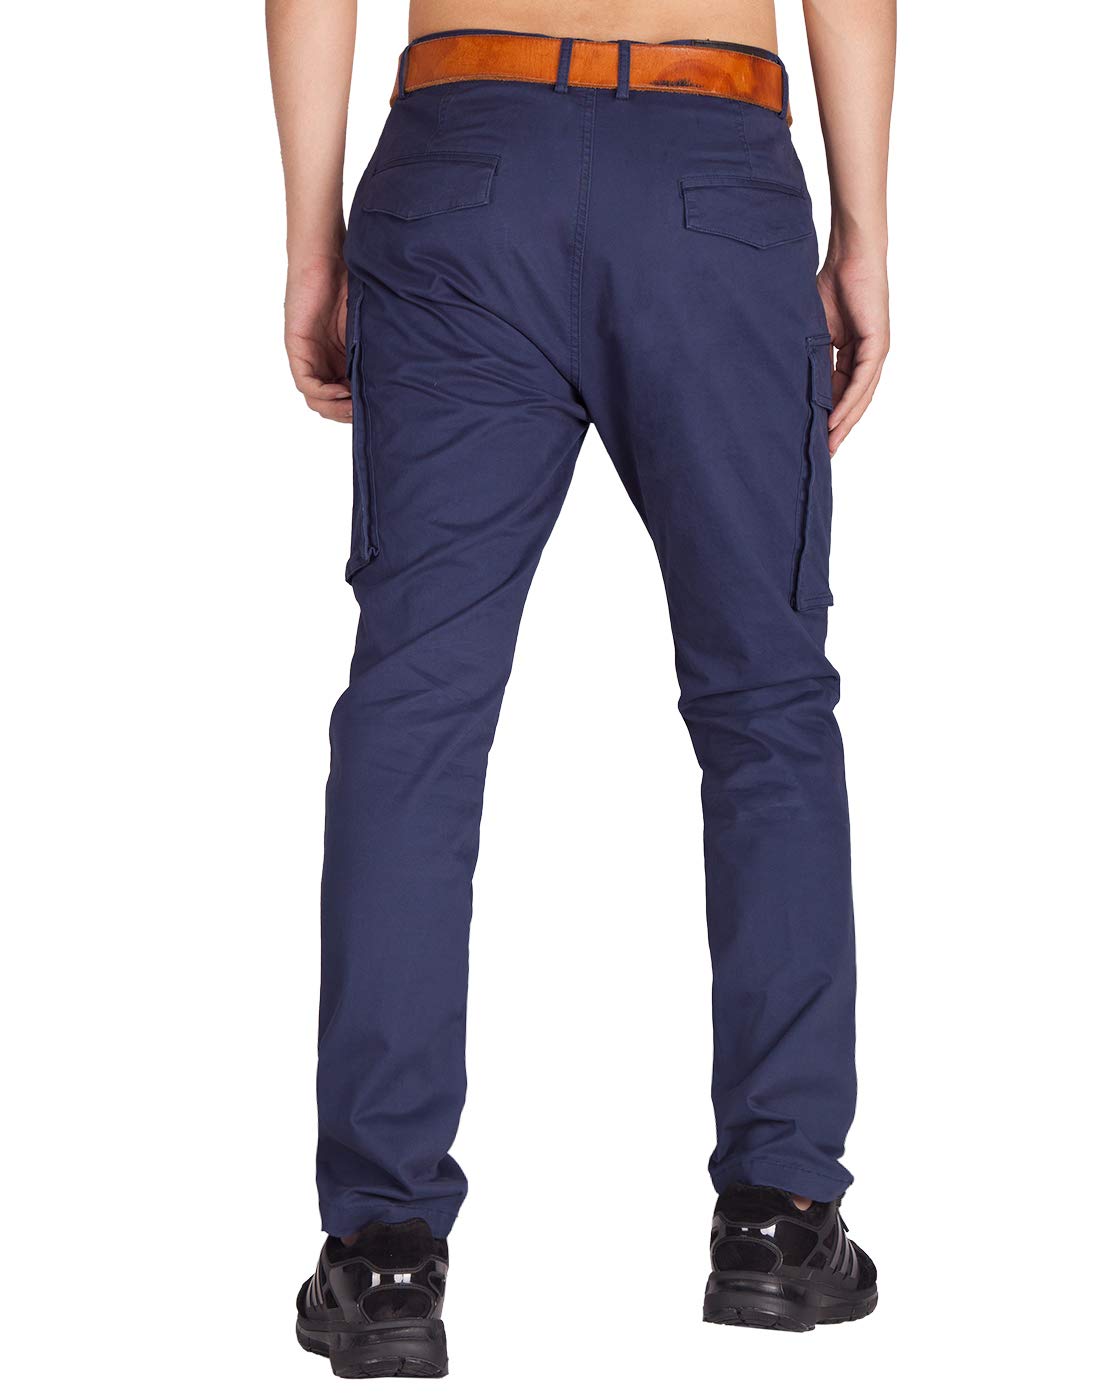 Aggregate 79+ sky blue trouser combination latest - in.cdgdbentre